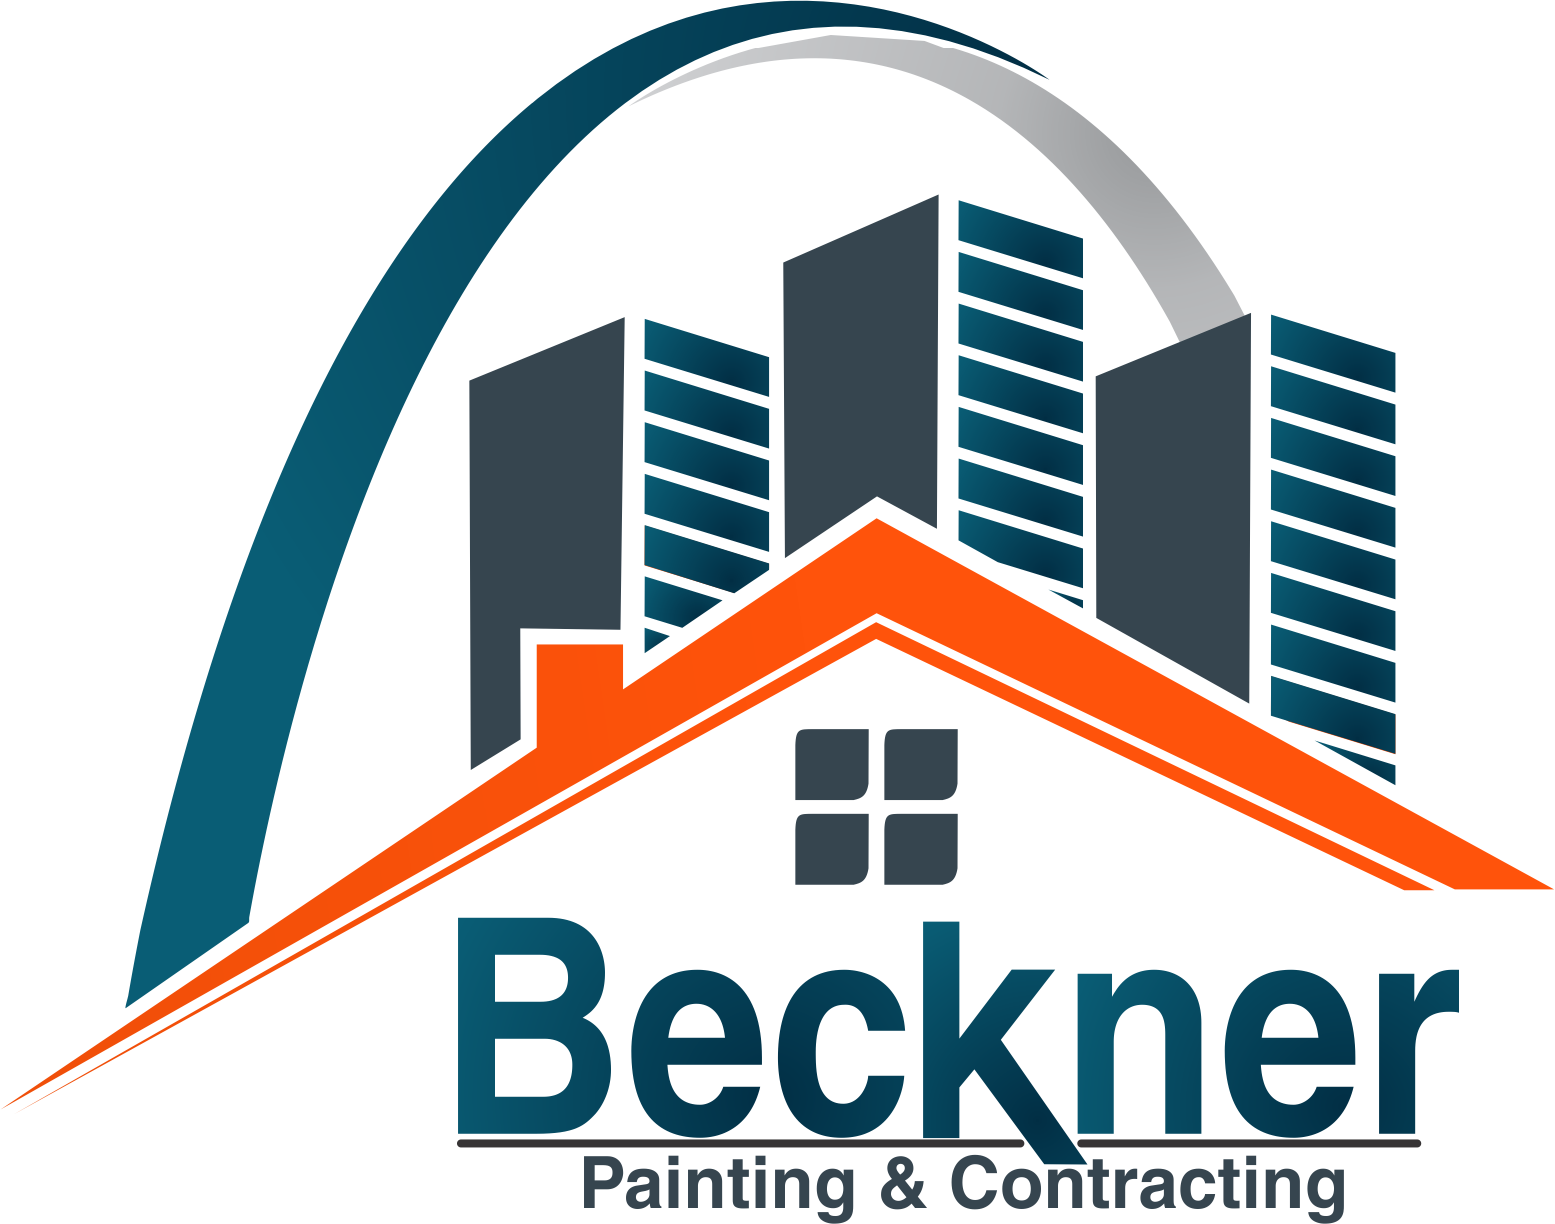 Beckner Painting & Contracting logo